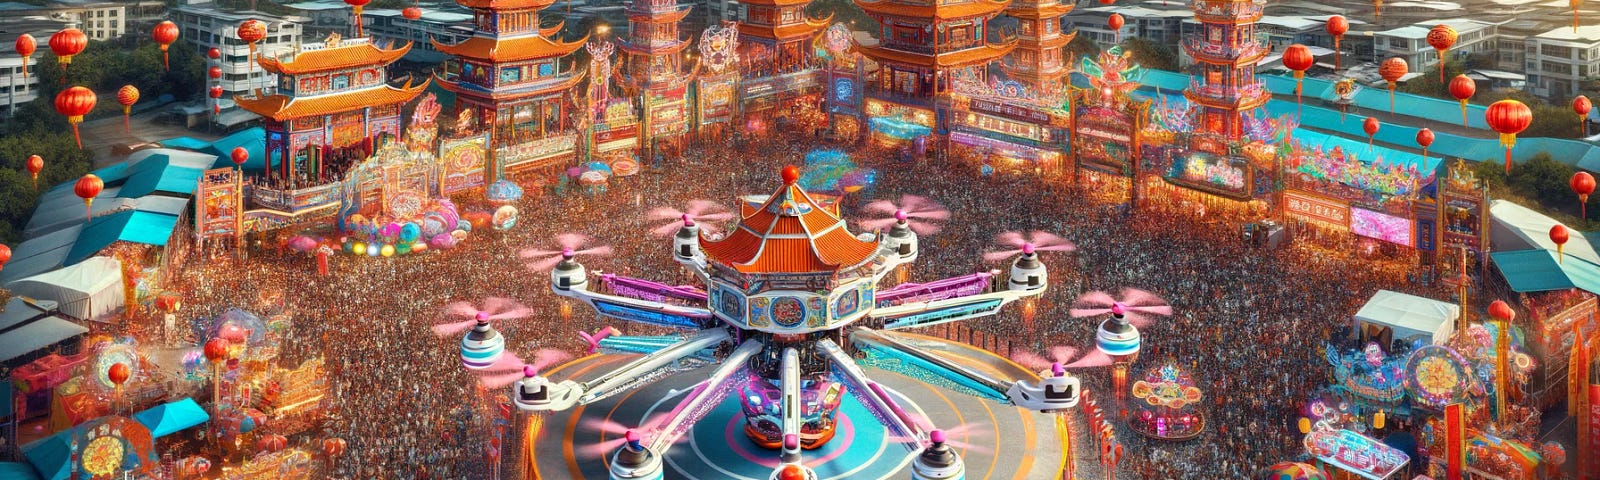 ChatGPT & DALL-E generated panoramic image of a lively Chinese carnival with a tethered octacopter ride